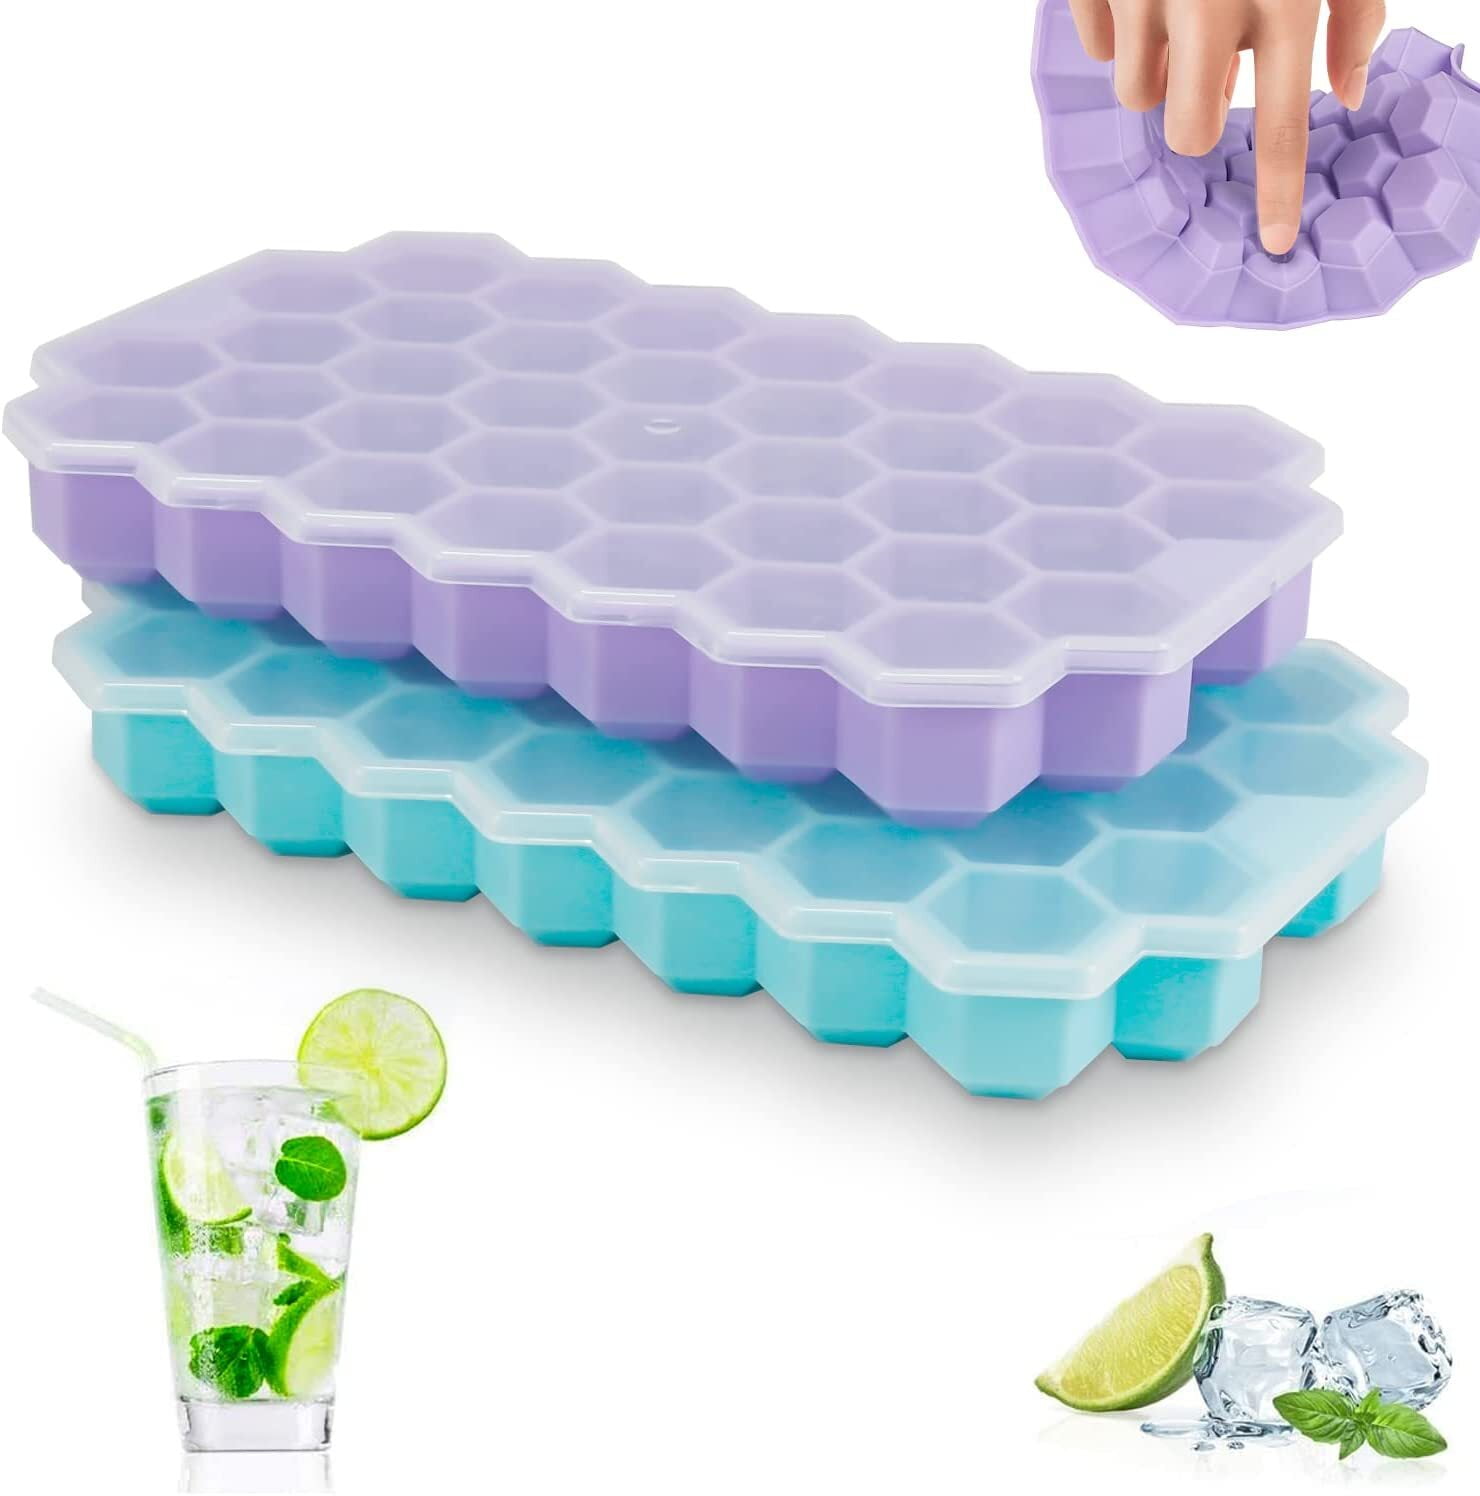 8 Cube Silicone Ice Cube Tray - Makes 8 Large 2 in. x 2 in. Cubes for  Beverages - BPA Free 798411CBU - The Home Depot